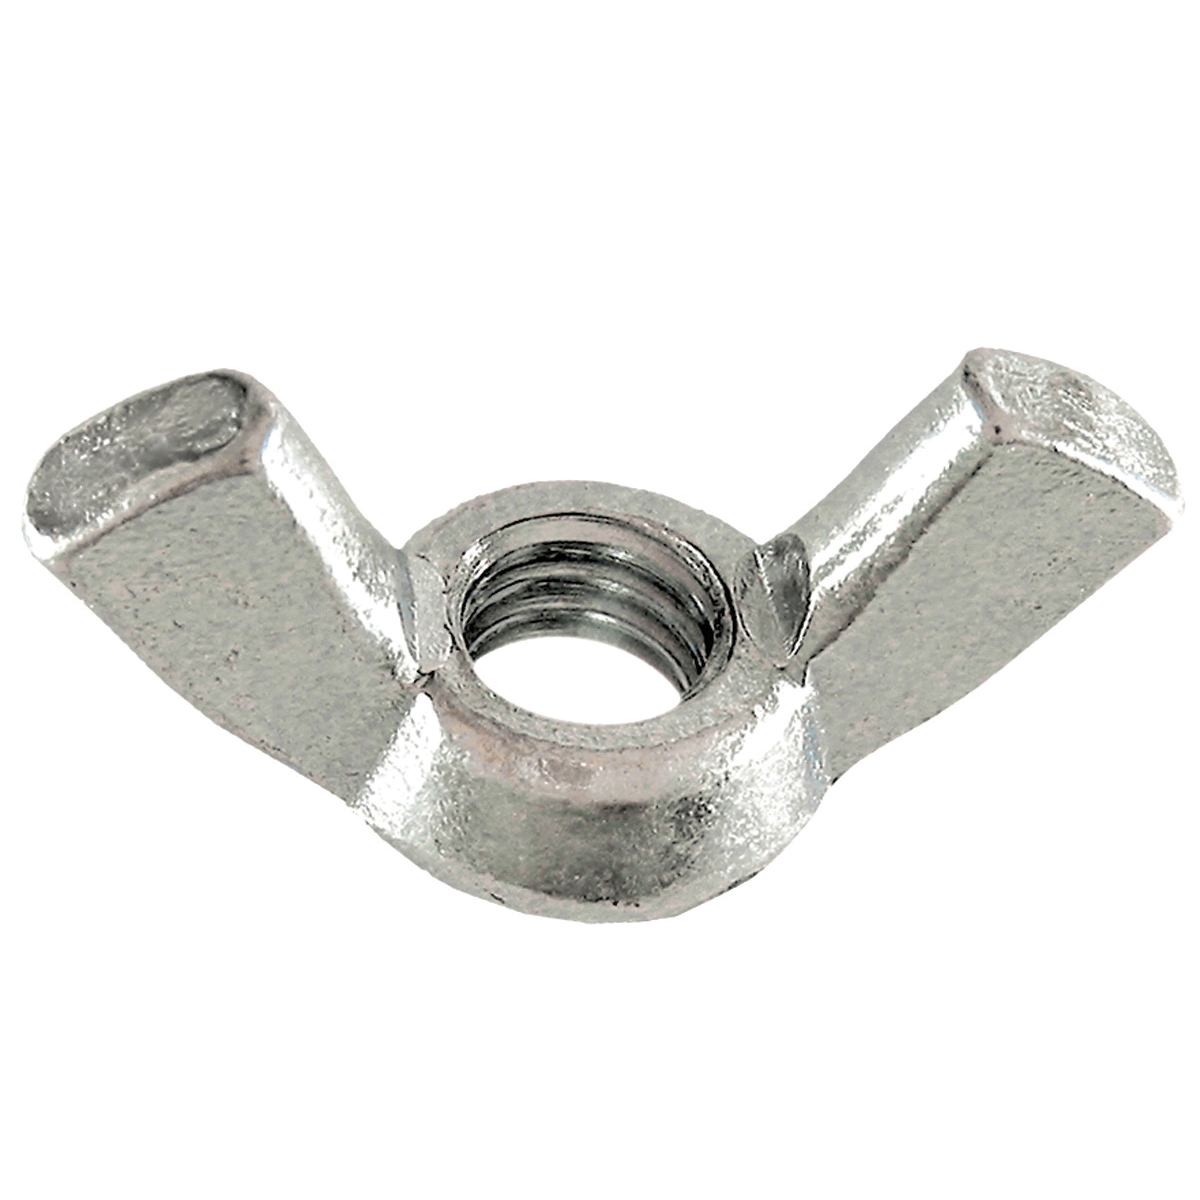 Paulin® 5038-116 Wing Nut, 5/16-18, Stainless Steel, Polished, 18-8 Material Grade